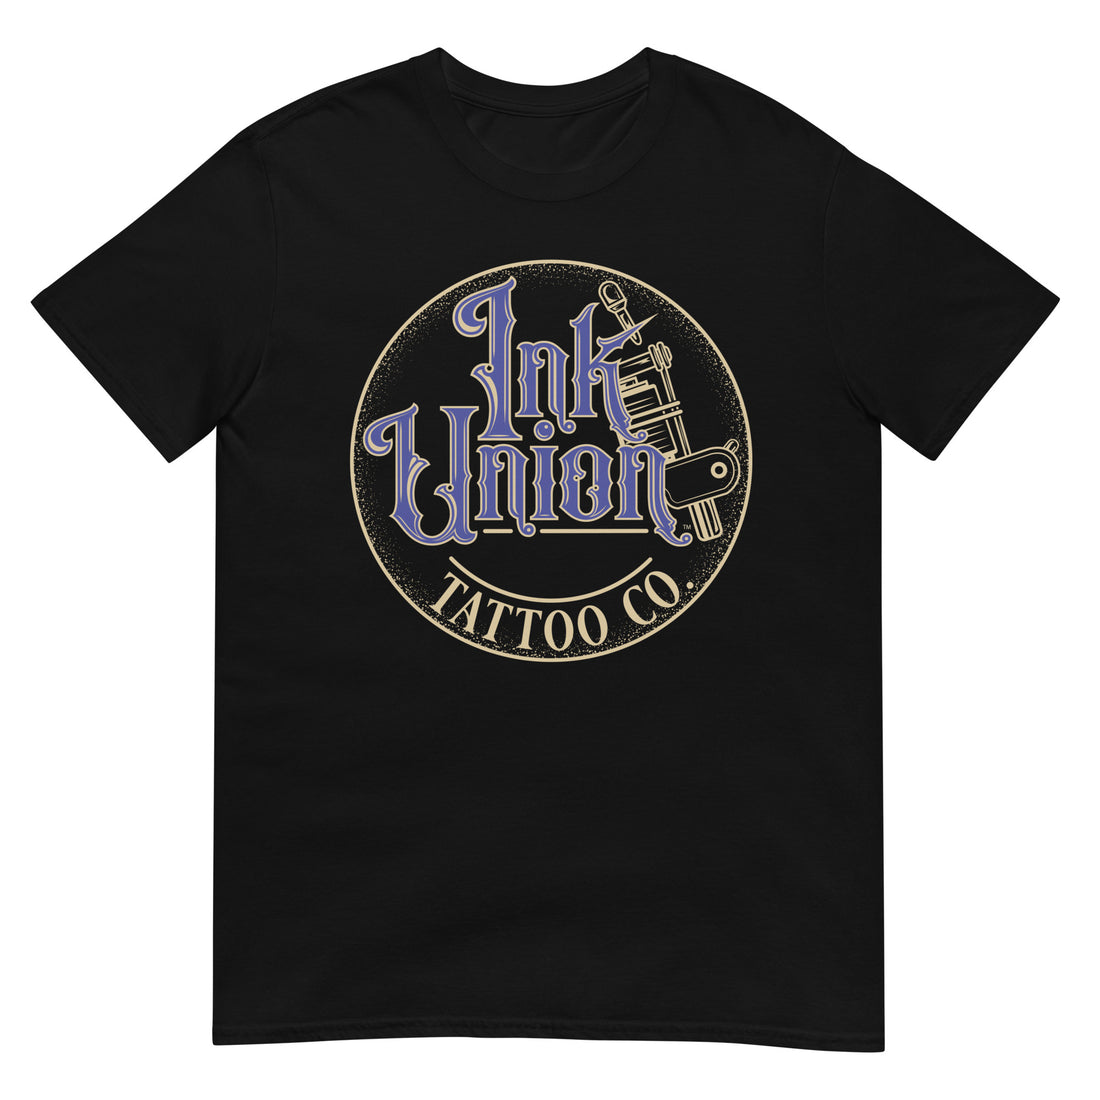 A black t-shirt with a gold circle containing fancy lettering in blue and gold that says Ink Union and a gold tattoo machine peeking out from behind on the right side.  There is a dot work gradient inside the circle, and the words Tattoo Co. in gold are at the bottom of the design.